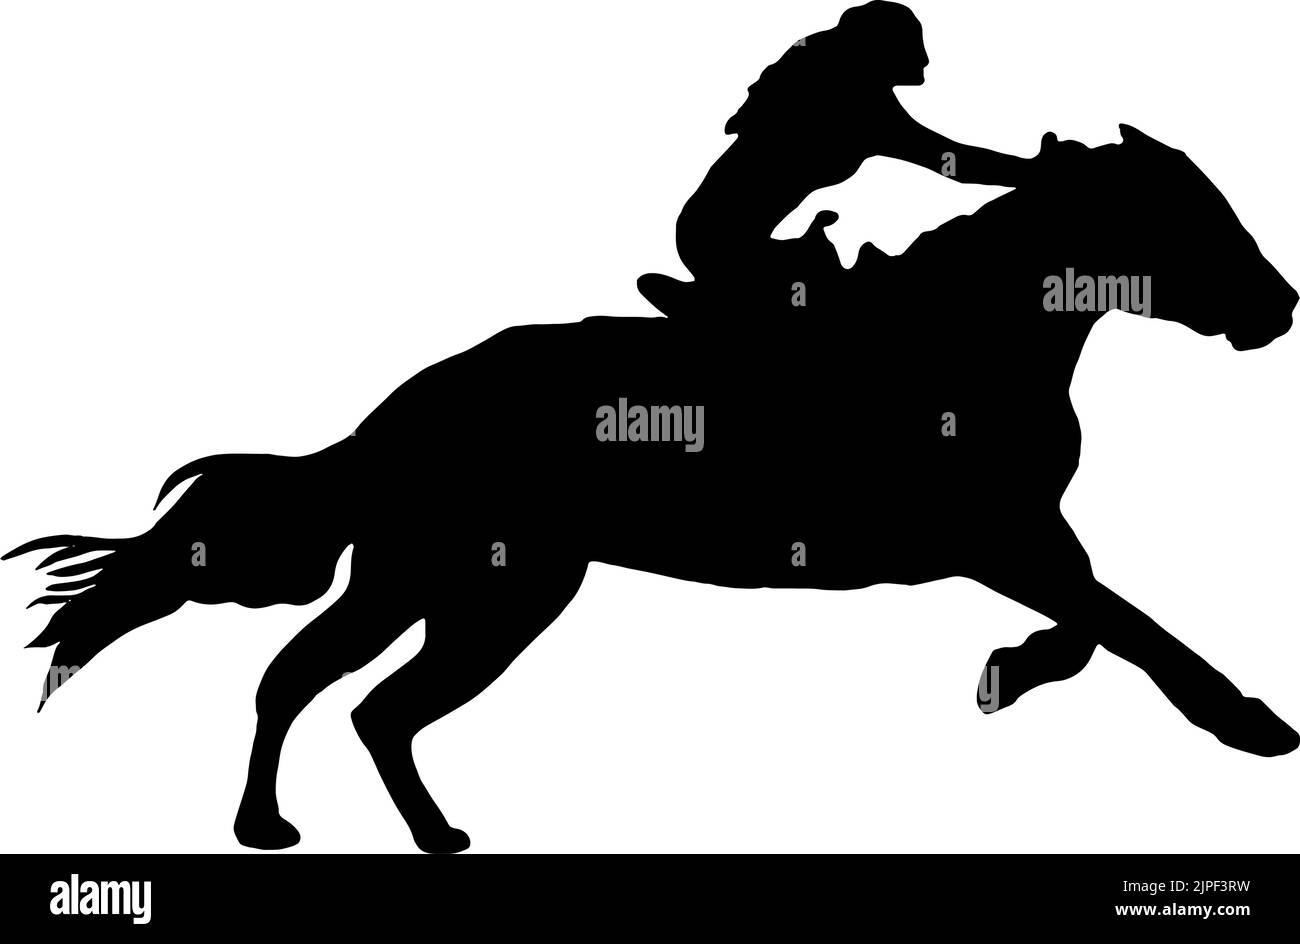 Silhouette of woman on horse galloping Stock Vector